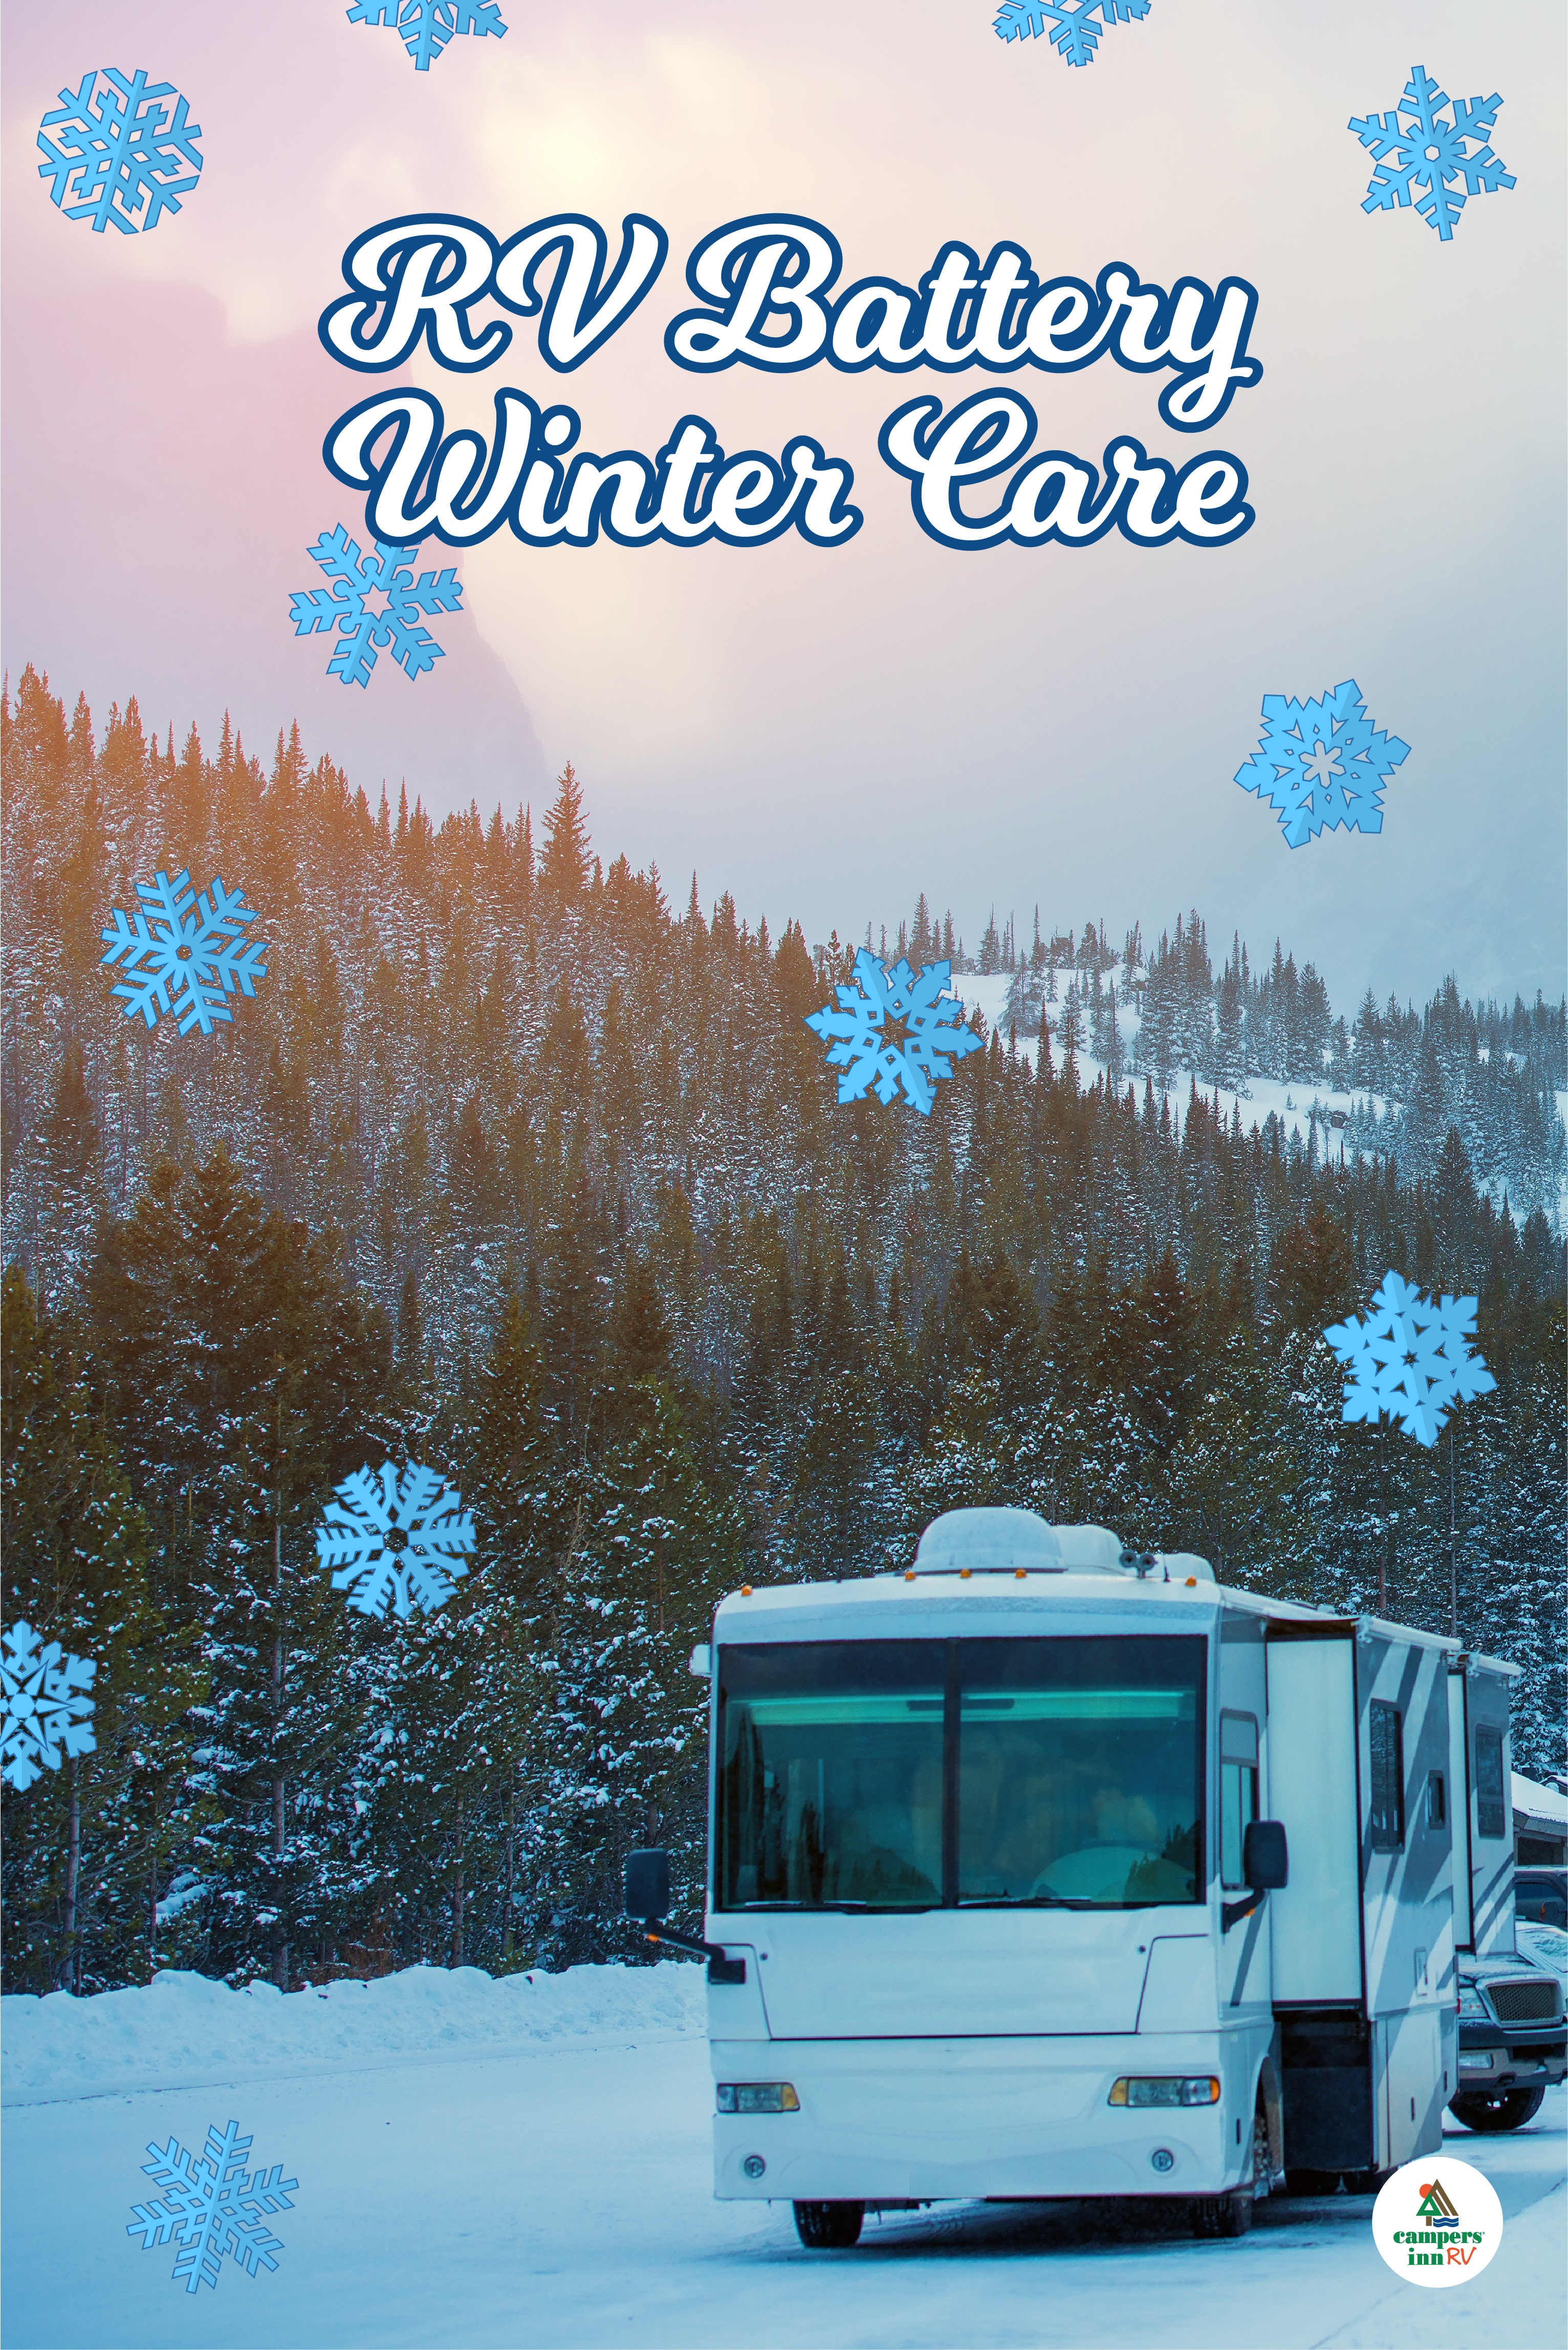 20181023_CI_Pinterest_and_IG_stories_covers RV Battery Winter Care